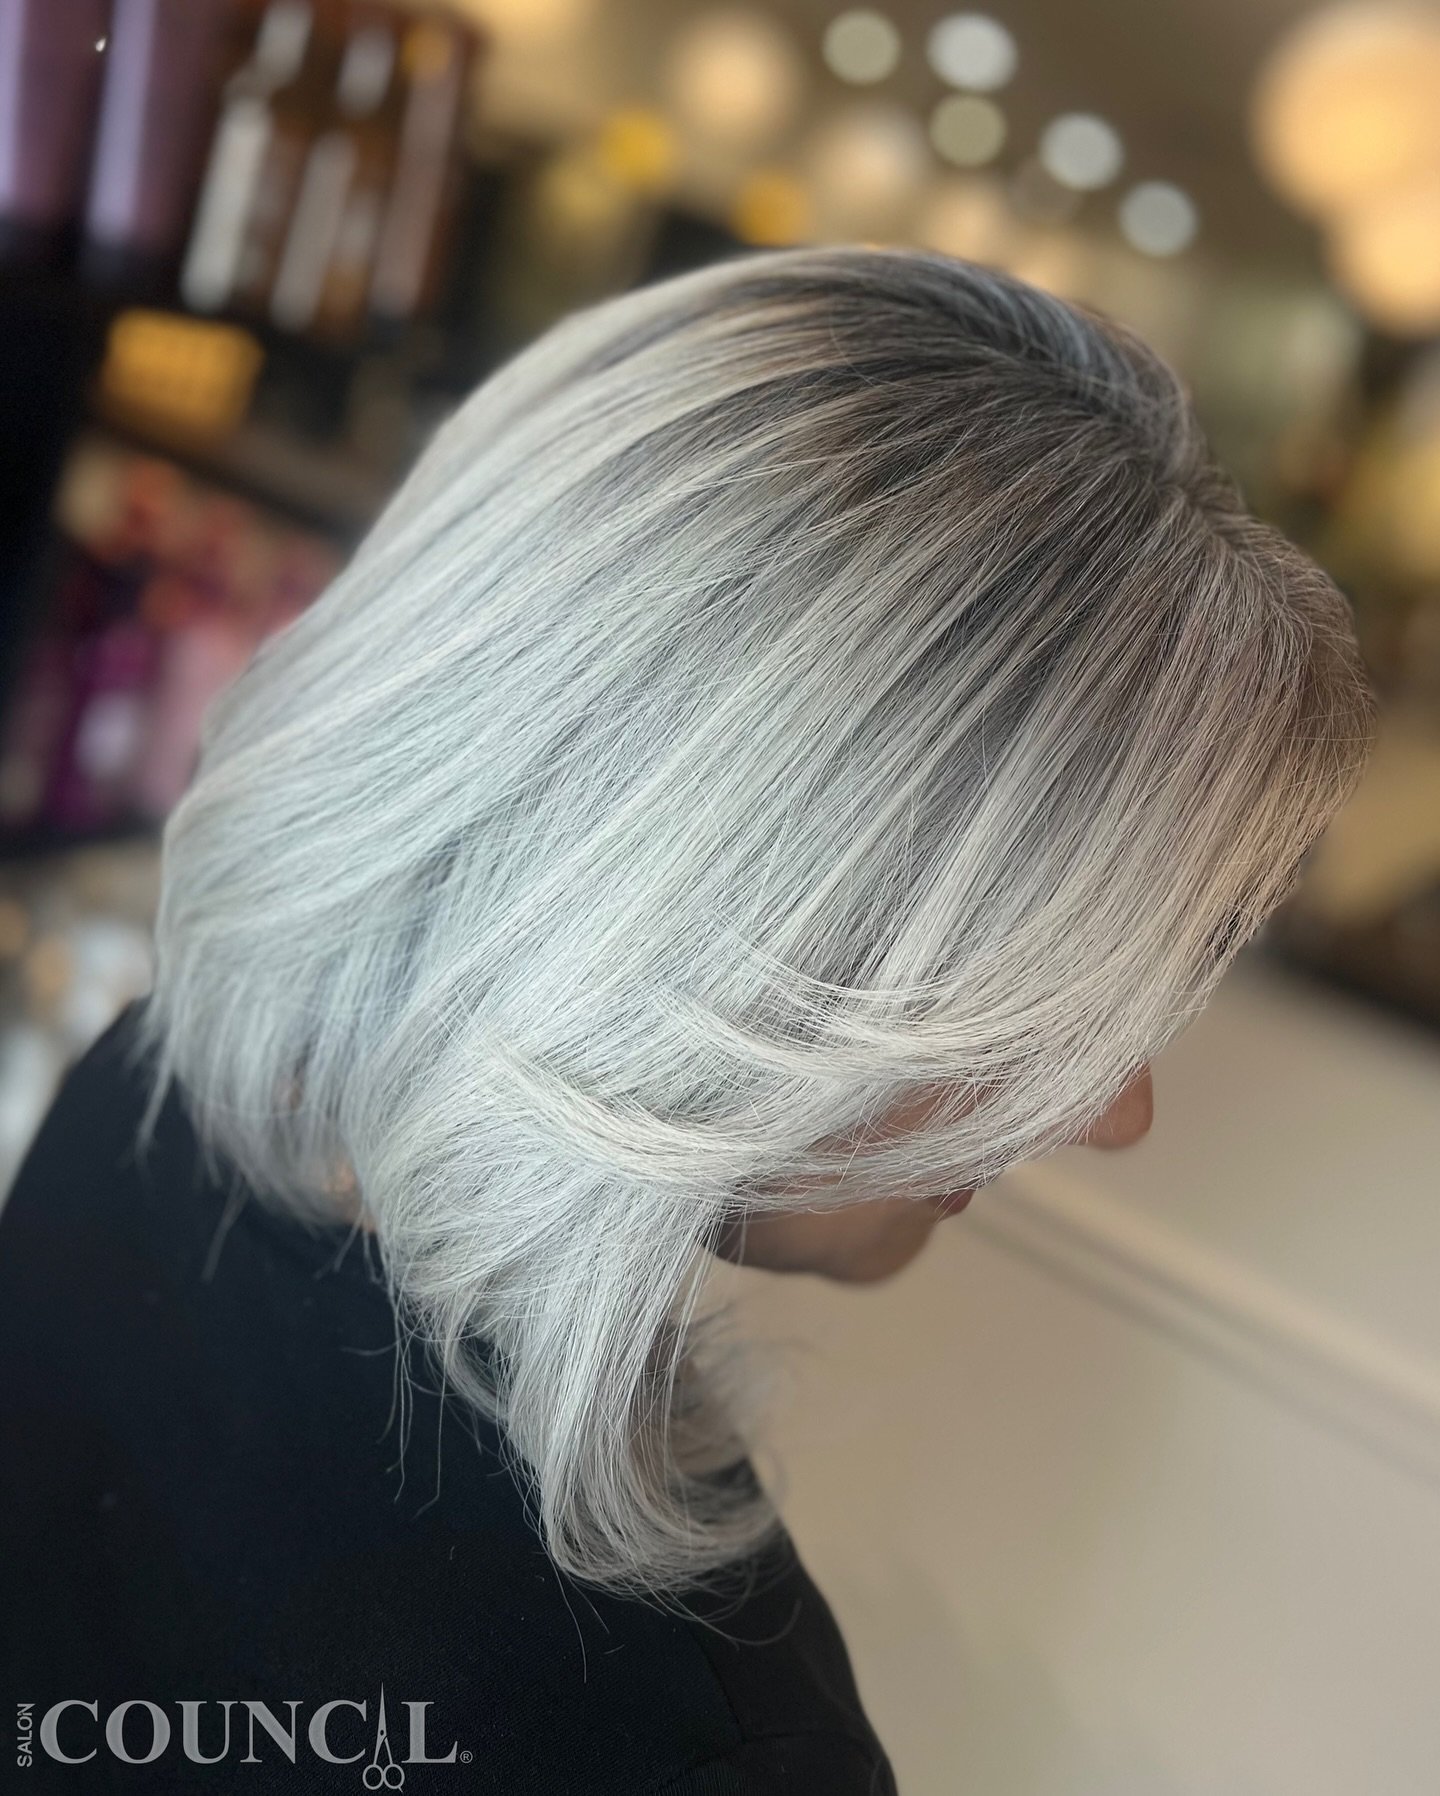 🎉#platinumblonde 
Rocking this stunning platinum blonde transformation done with heavy foils, perfect toner, Olaplex treatment, fresh haircut, and a sleek blowdry style! ✨ 
Truly a head-turning look! #PlatinumBlonde #HairMakeover

HEAVY FOILS &bull;